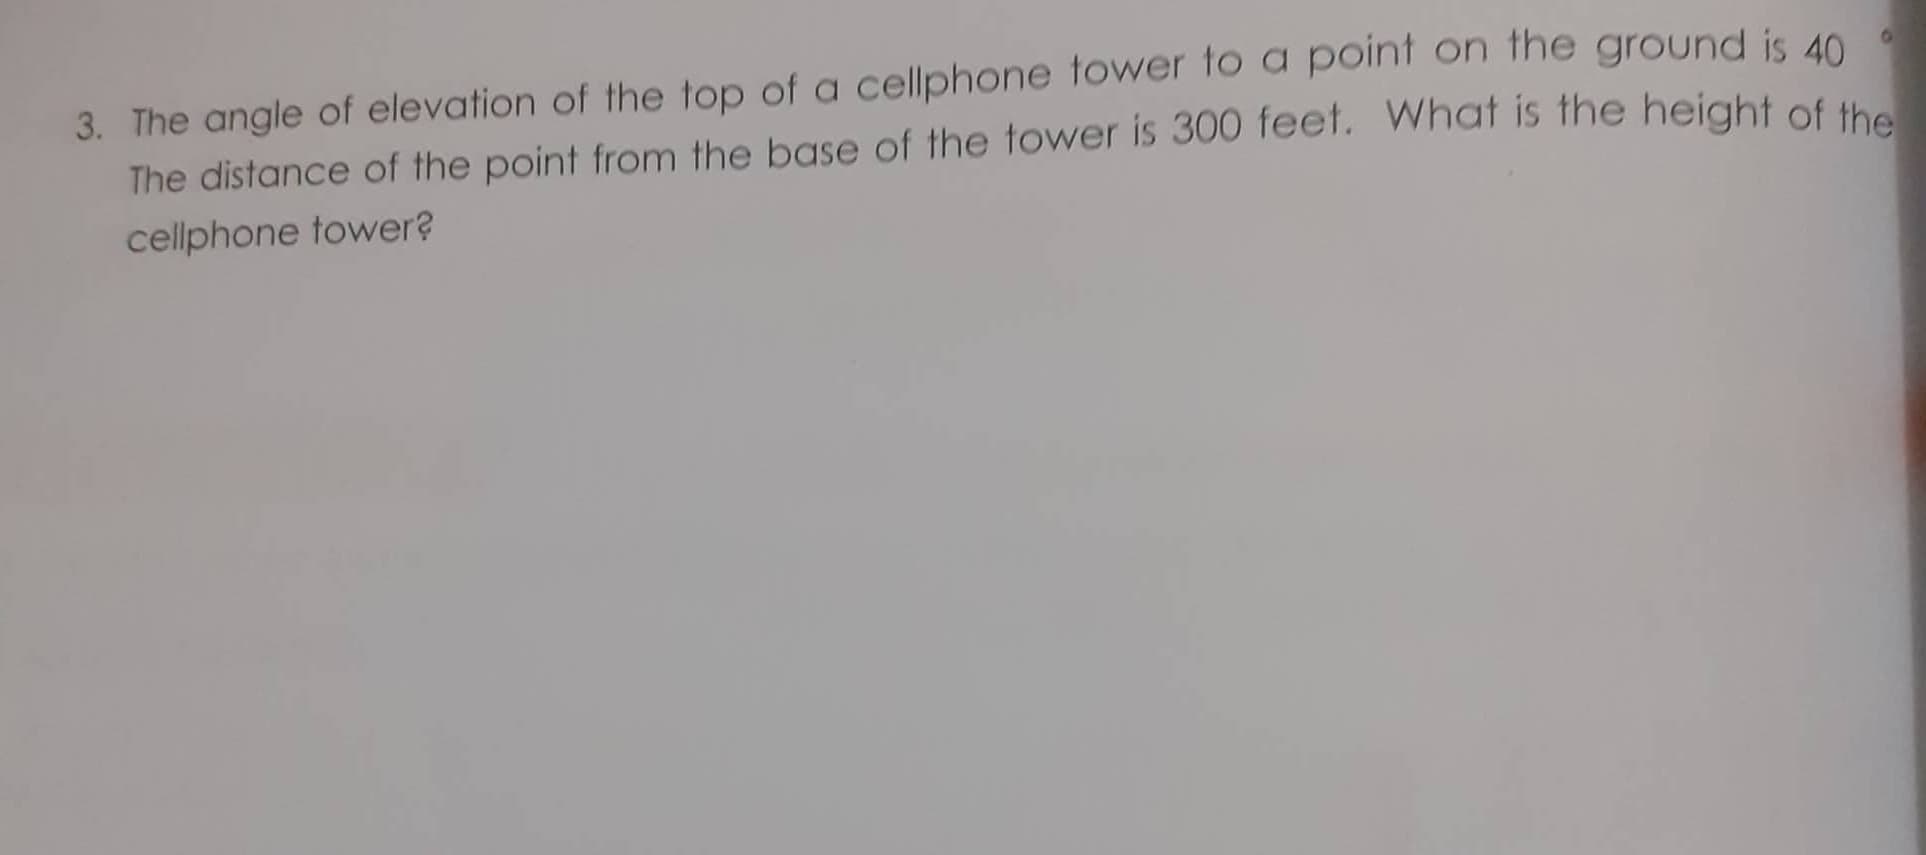 3. The angle of elevation of the top of a cellphone tower to a point on the ground is 40
The distance of the point from the base of the tower is 300 feet. What is the height of the
cellphone tower?
